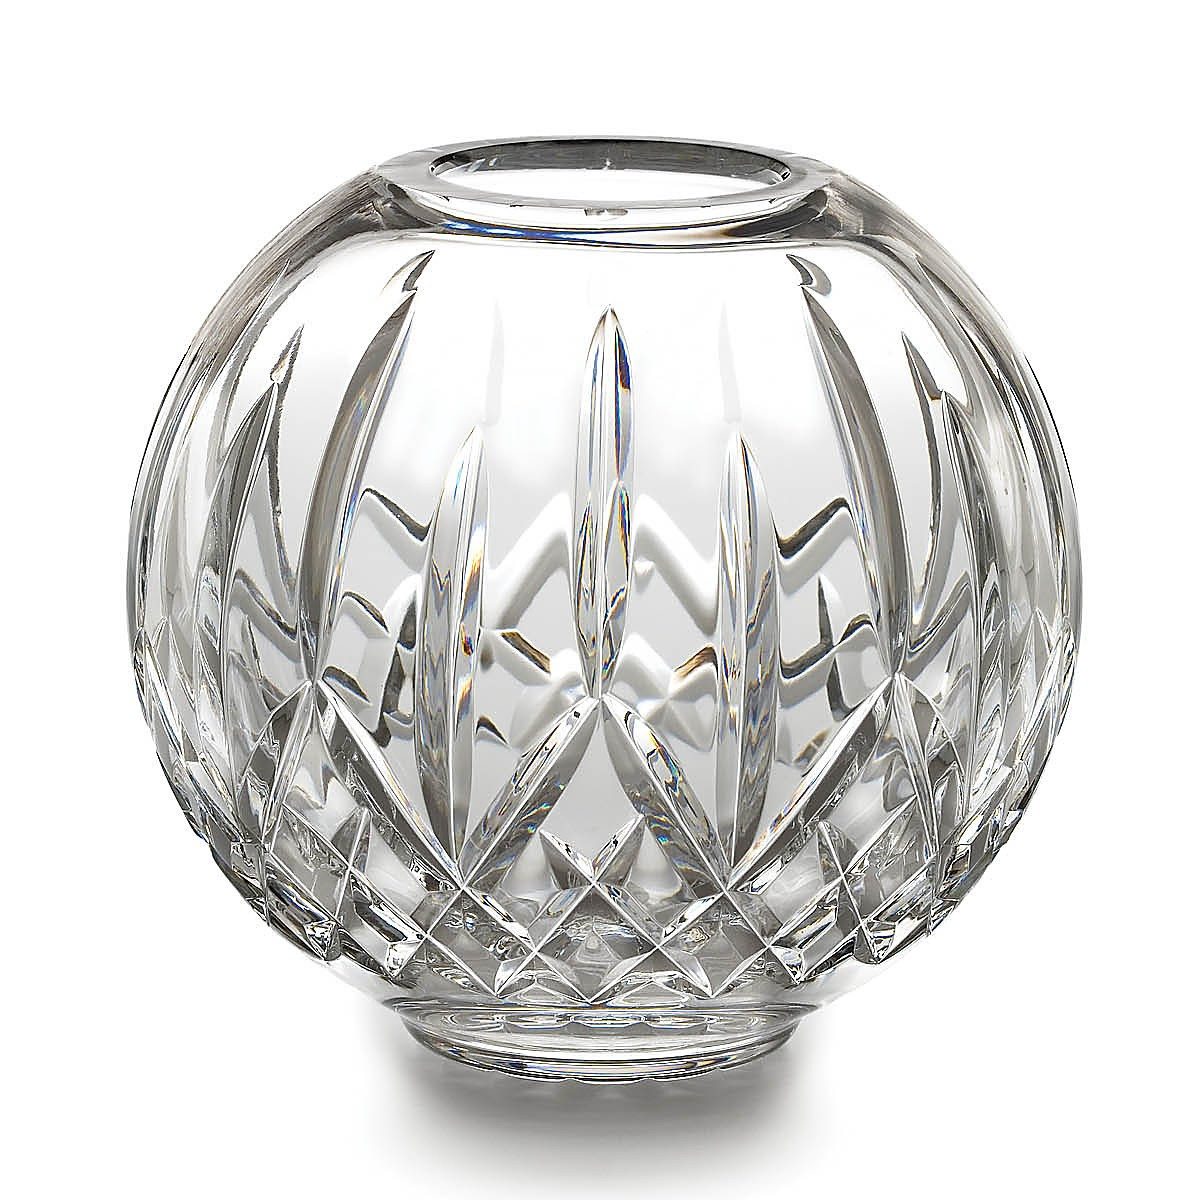 14 Spectacular Waterford Lismore Castle Vase 2024 free download waterford lismore castle vase of waterford crystal colorful waterford crystal lismore rose bowl in waterfordcrystalcolorful waterford crystal lismore rose bowl price 250 00 color crystal